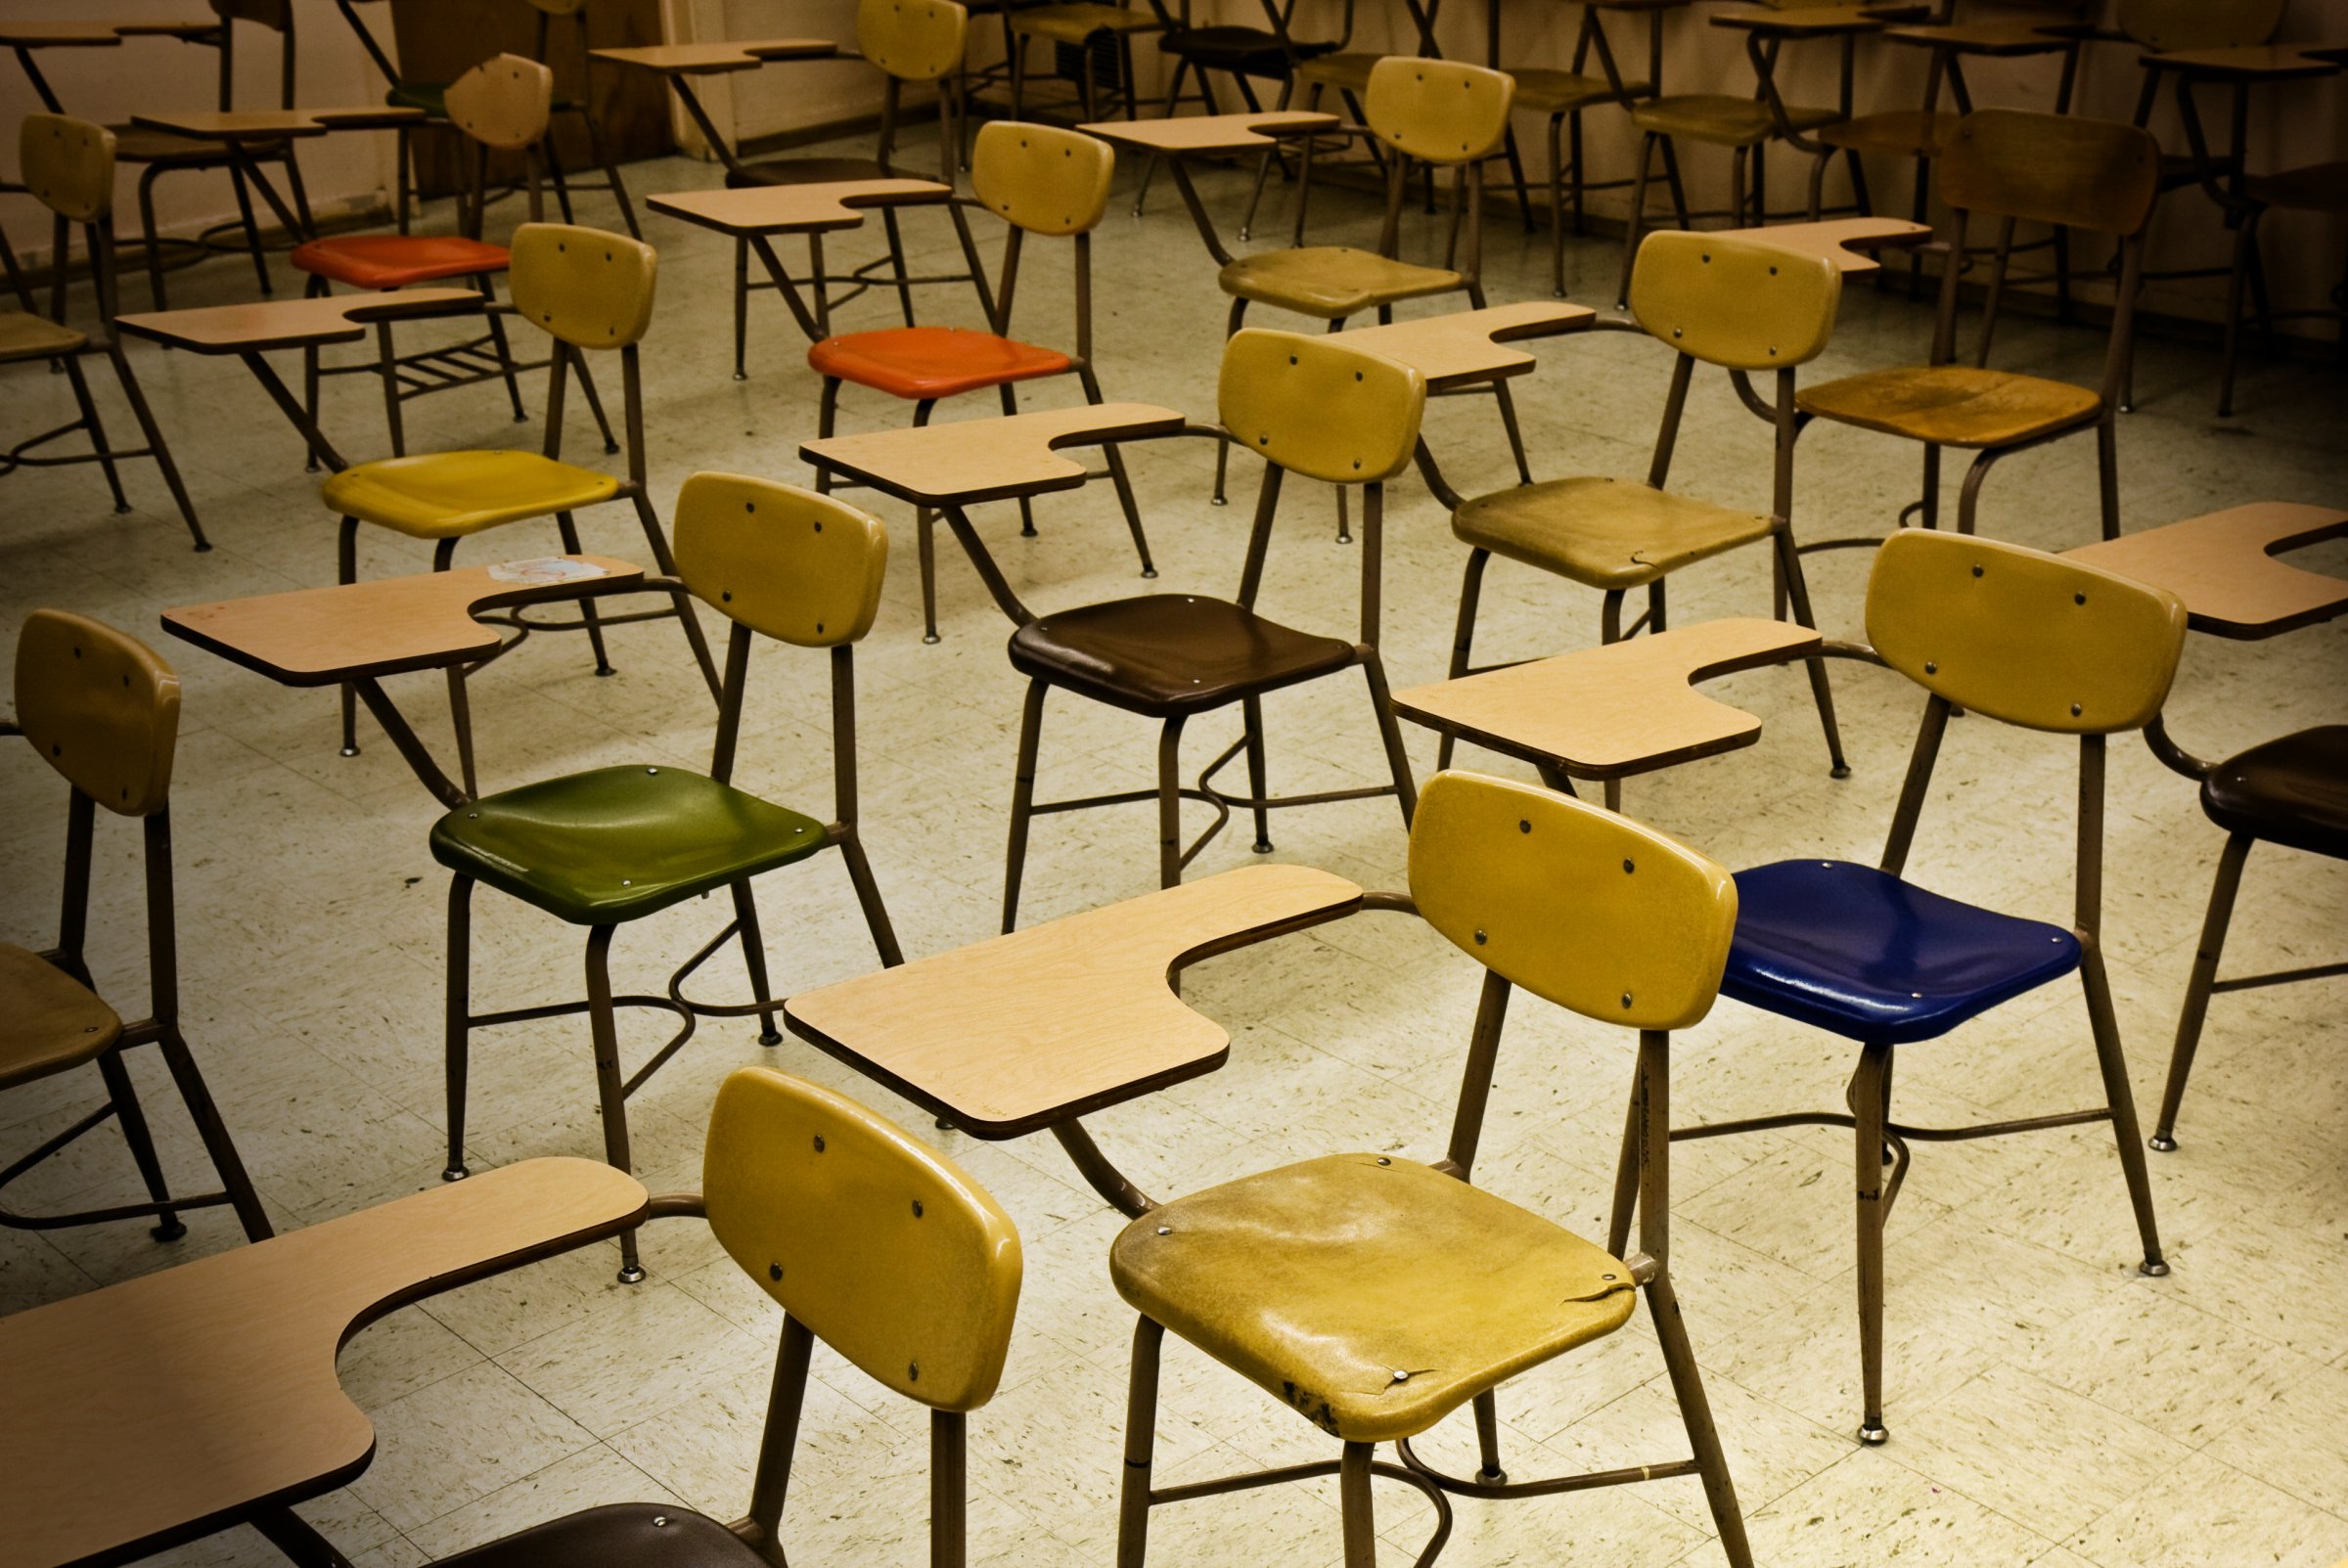 Chairs in an empty classroom